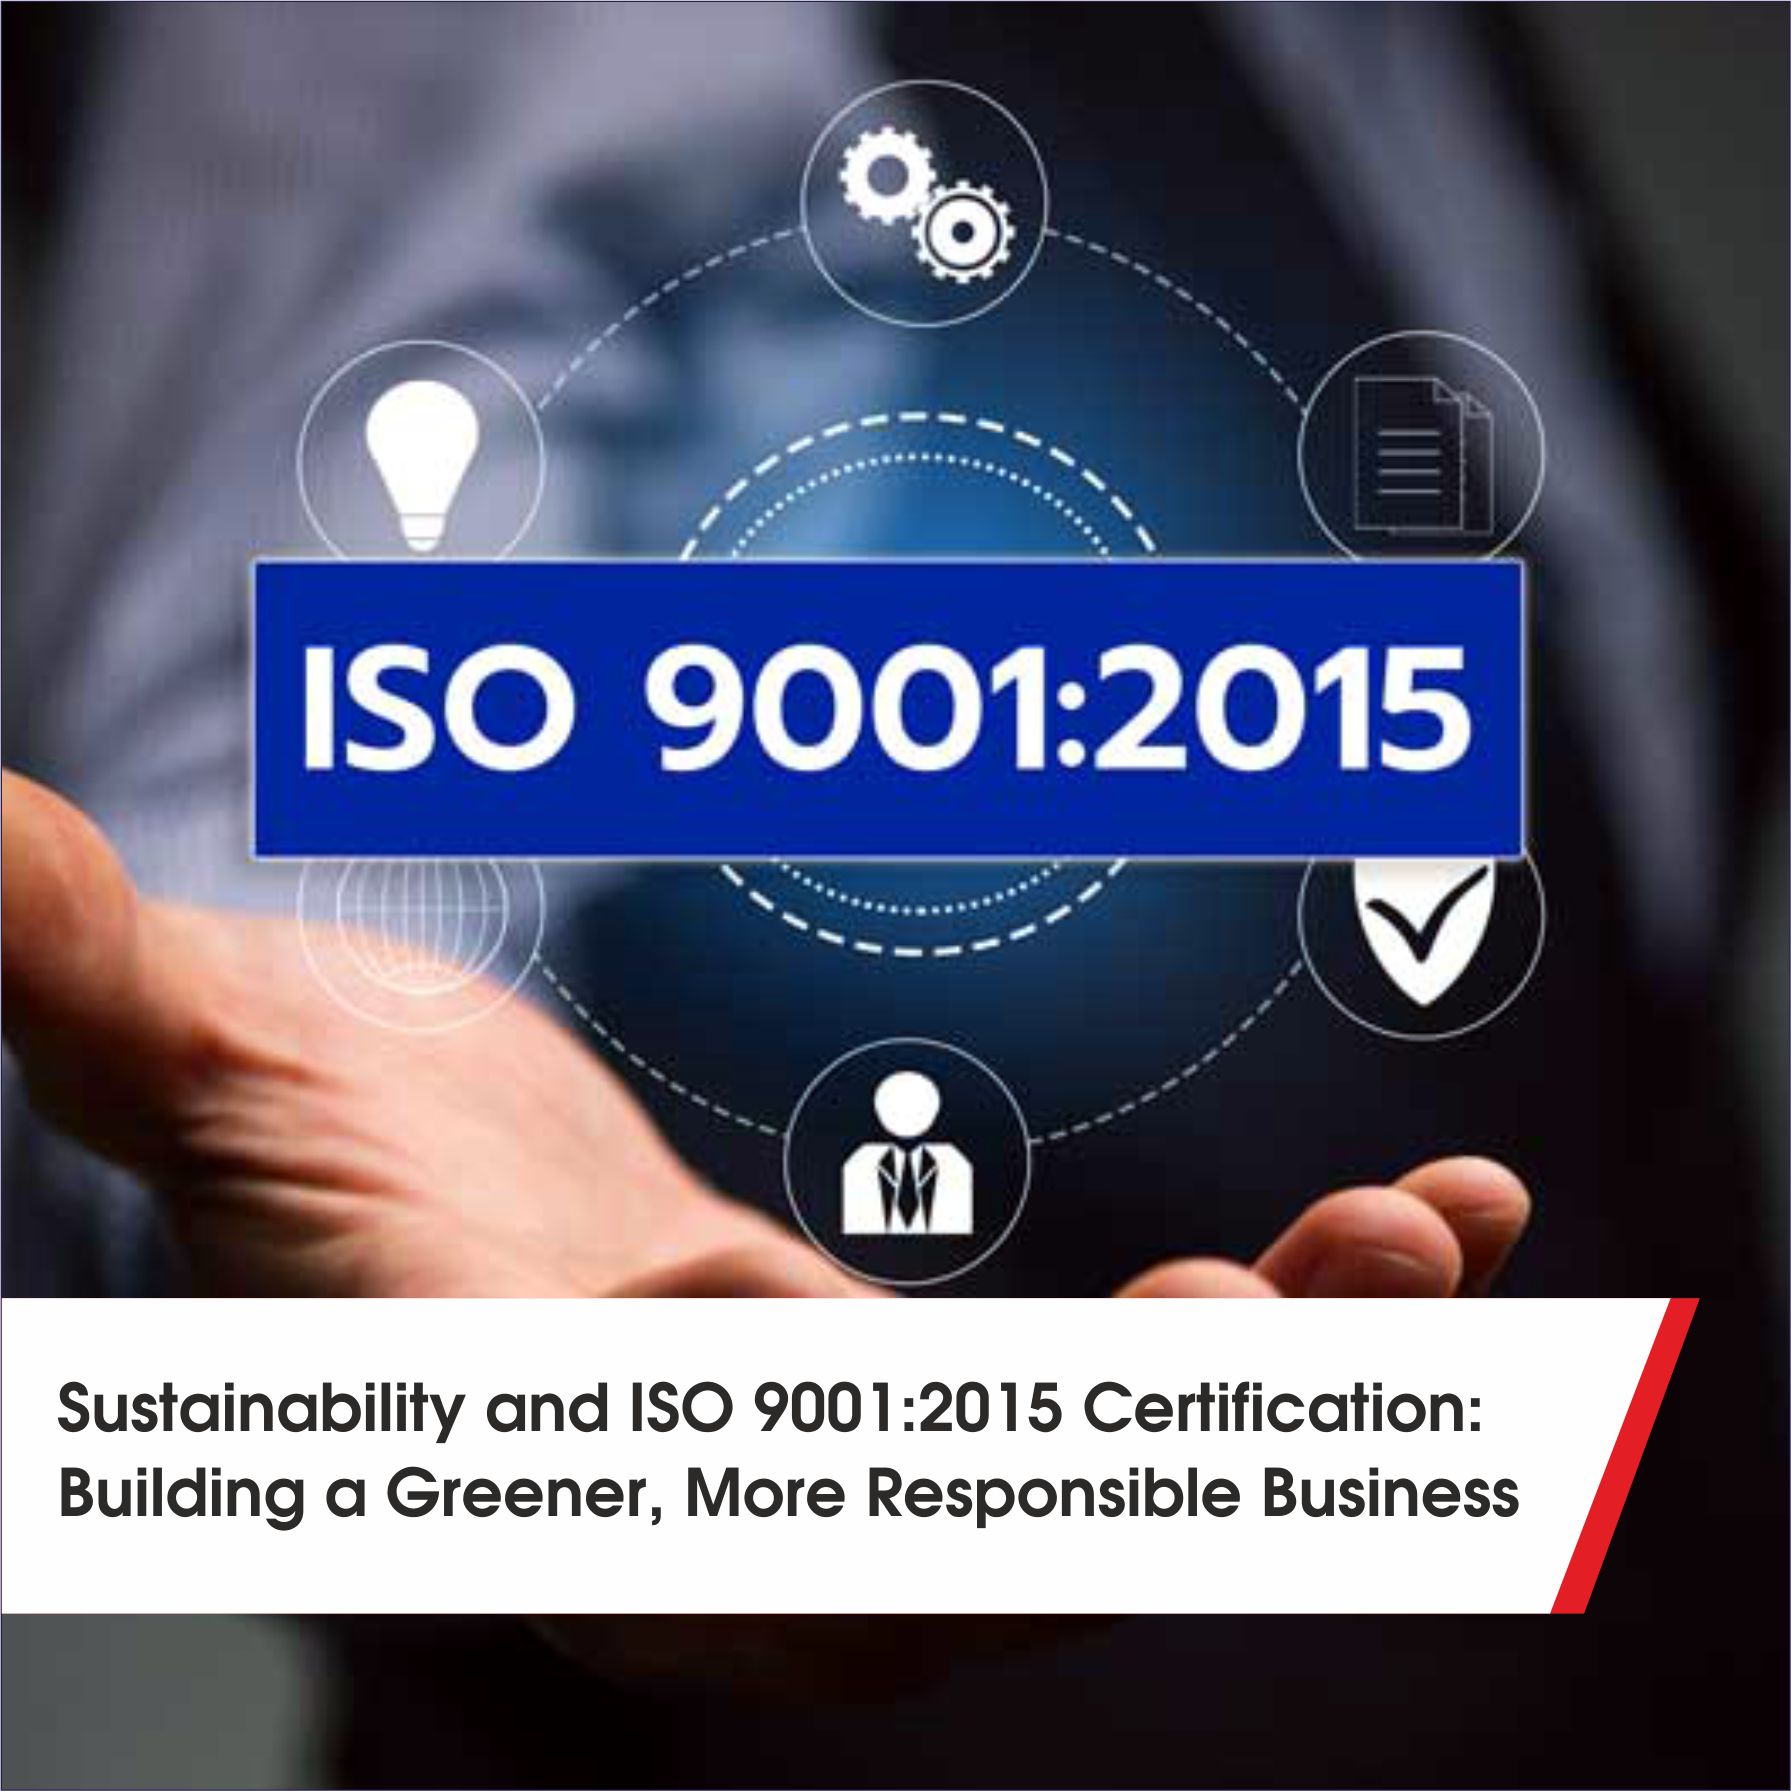 Sustainability and ISO 9001:2015 Certification: Building a Greener, More Responsible Business